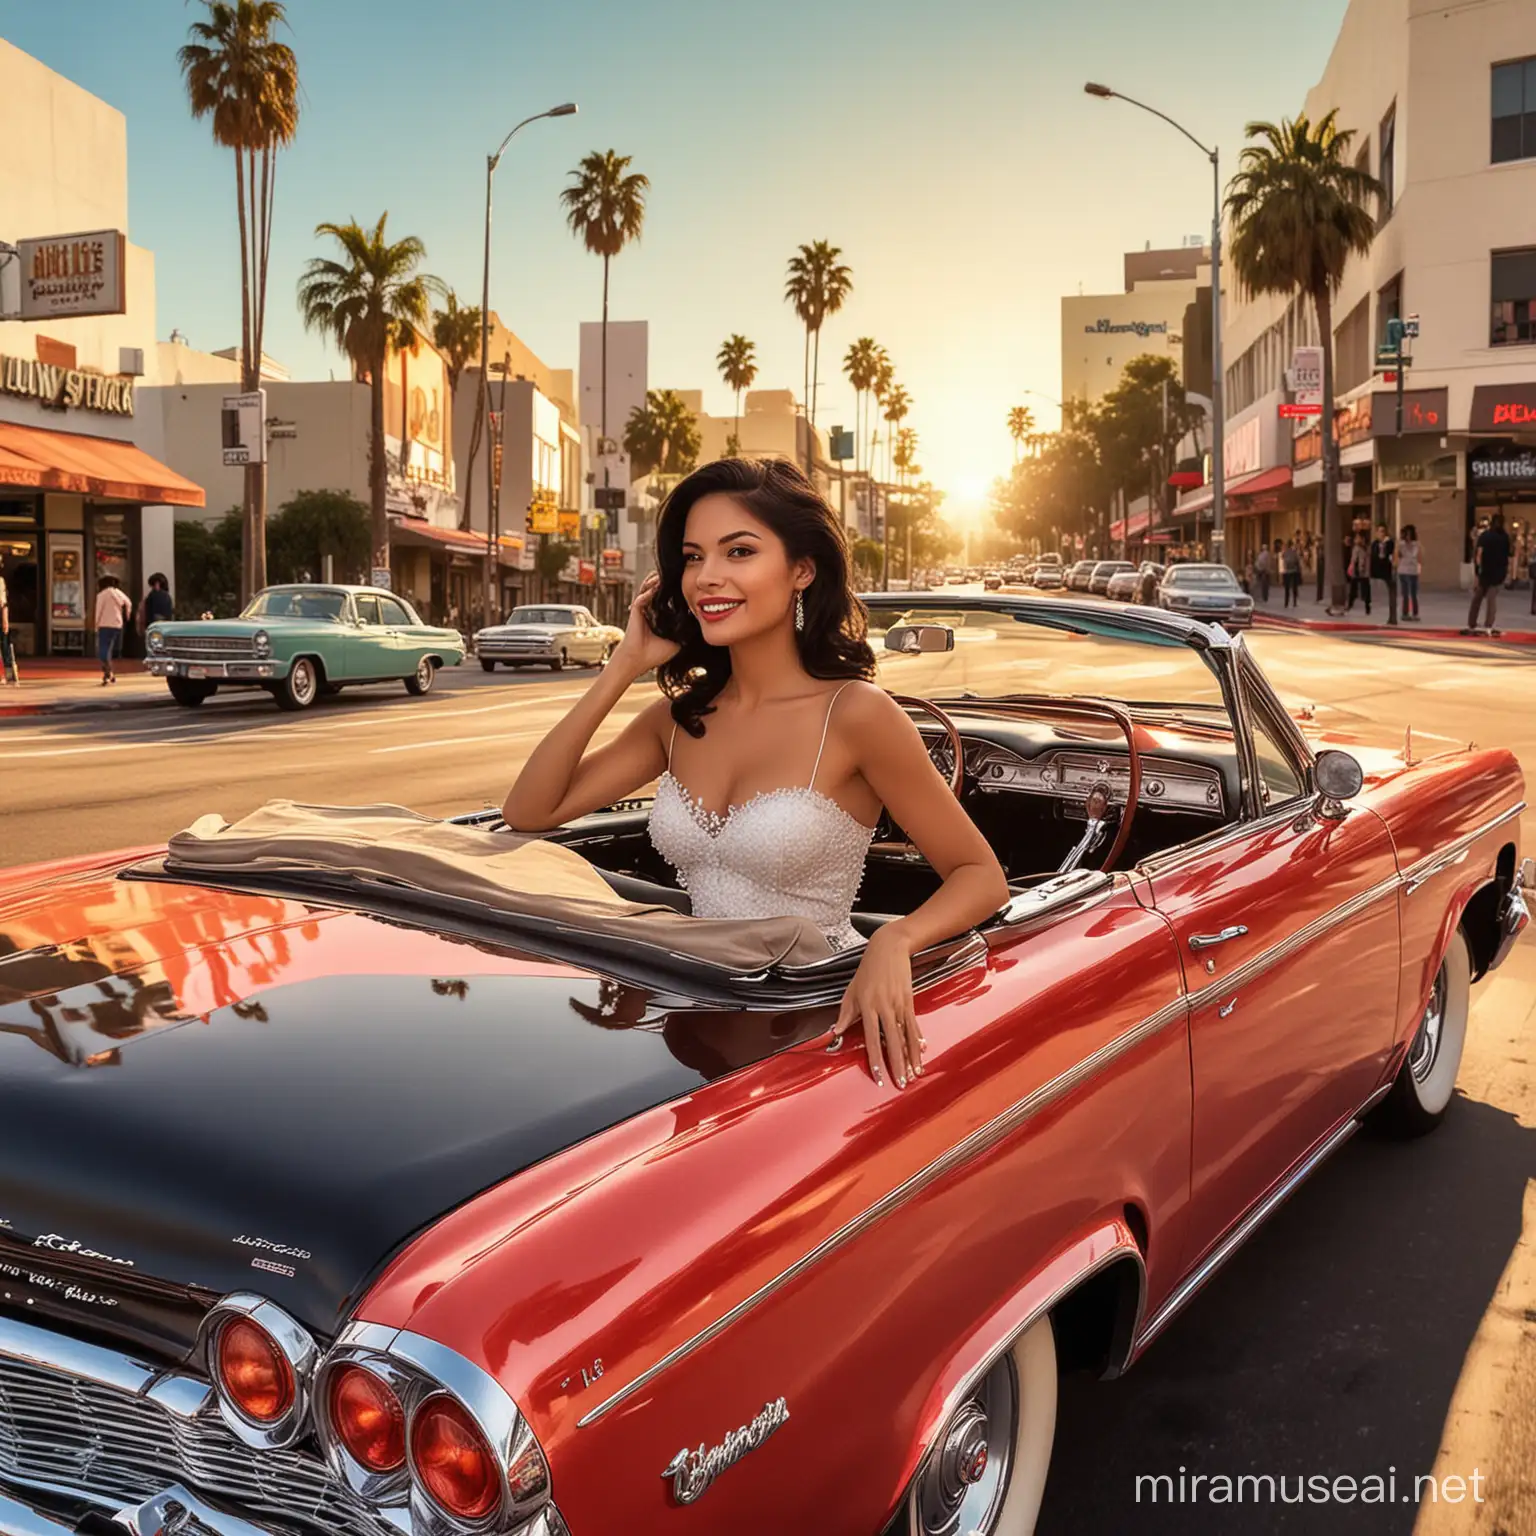 pretty latina woman driving down hollywood sunset blvd withh hollywood walk of fame in background in convertible 1964 impala  vintage comic book style... picture needs to be taken from a distance 